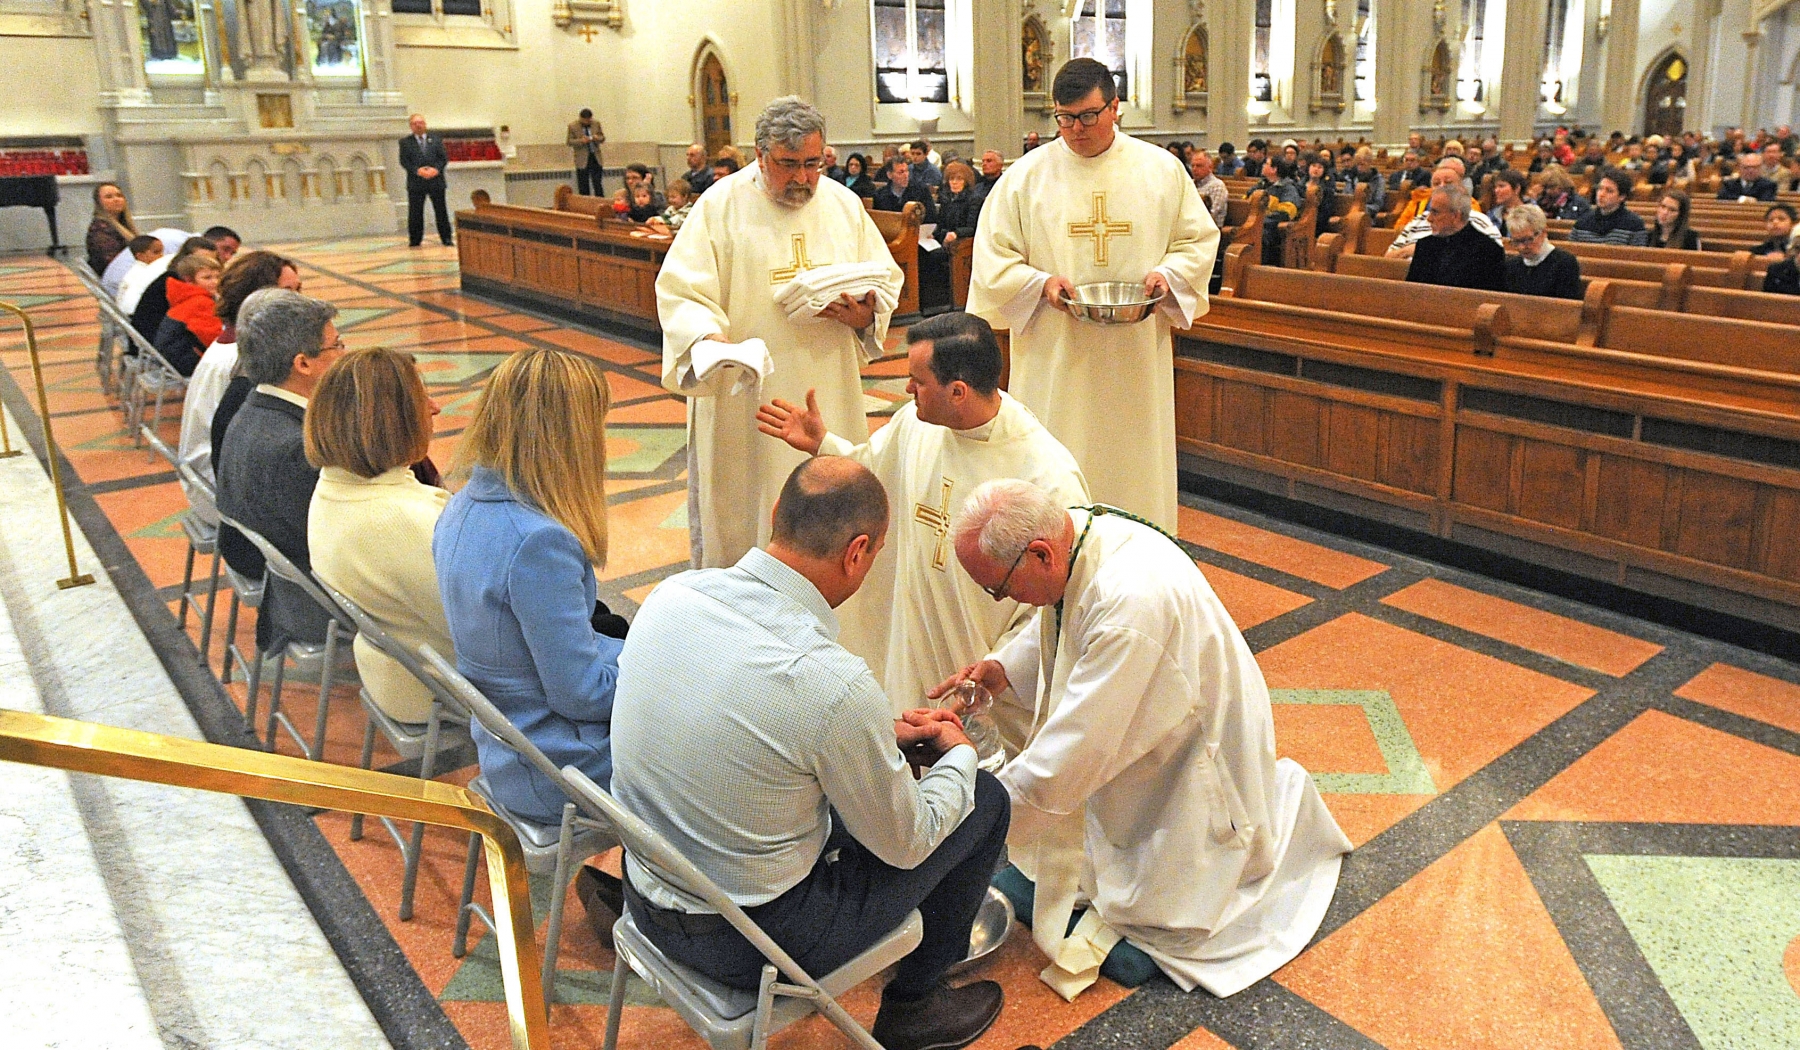 Bishop Richard J. Malone washes the feet of 12 at St. Joseph Cathedral during the Evening Mass of the Lord's Supper.
Dan Cappellazzo/Staff photographer

